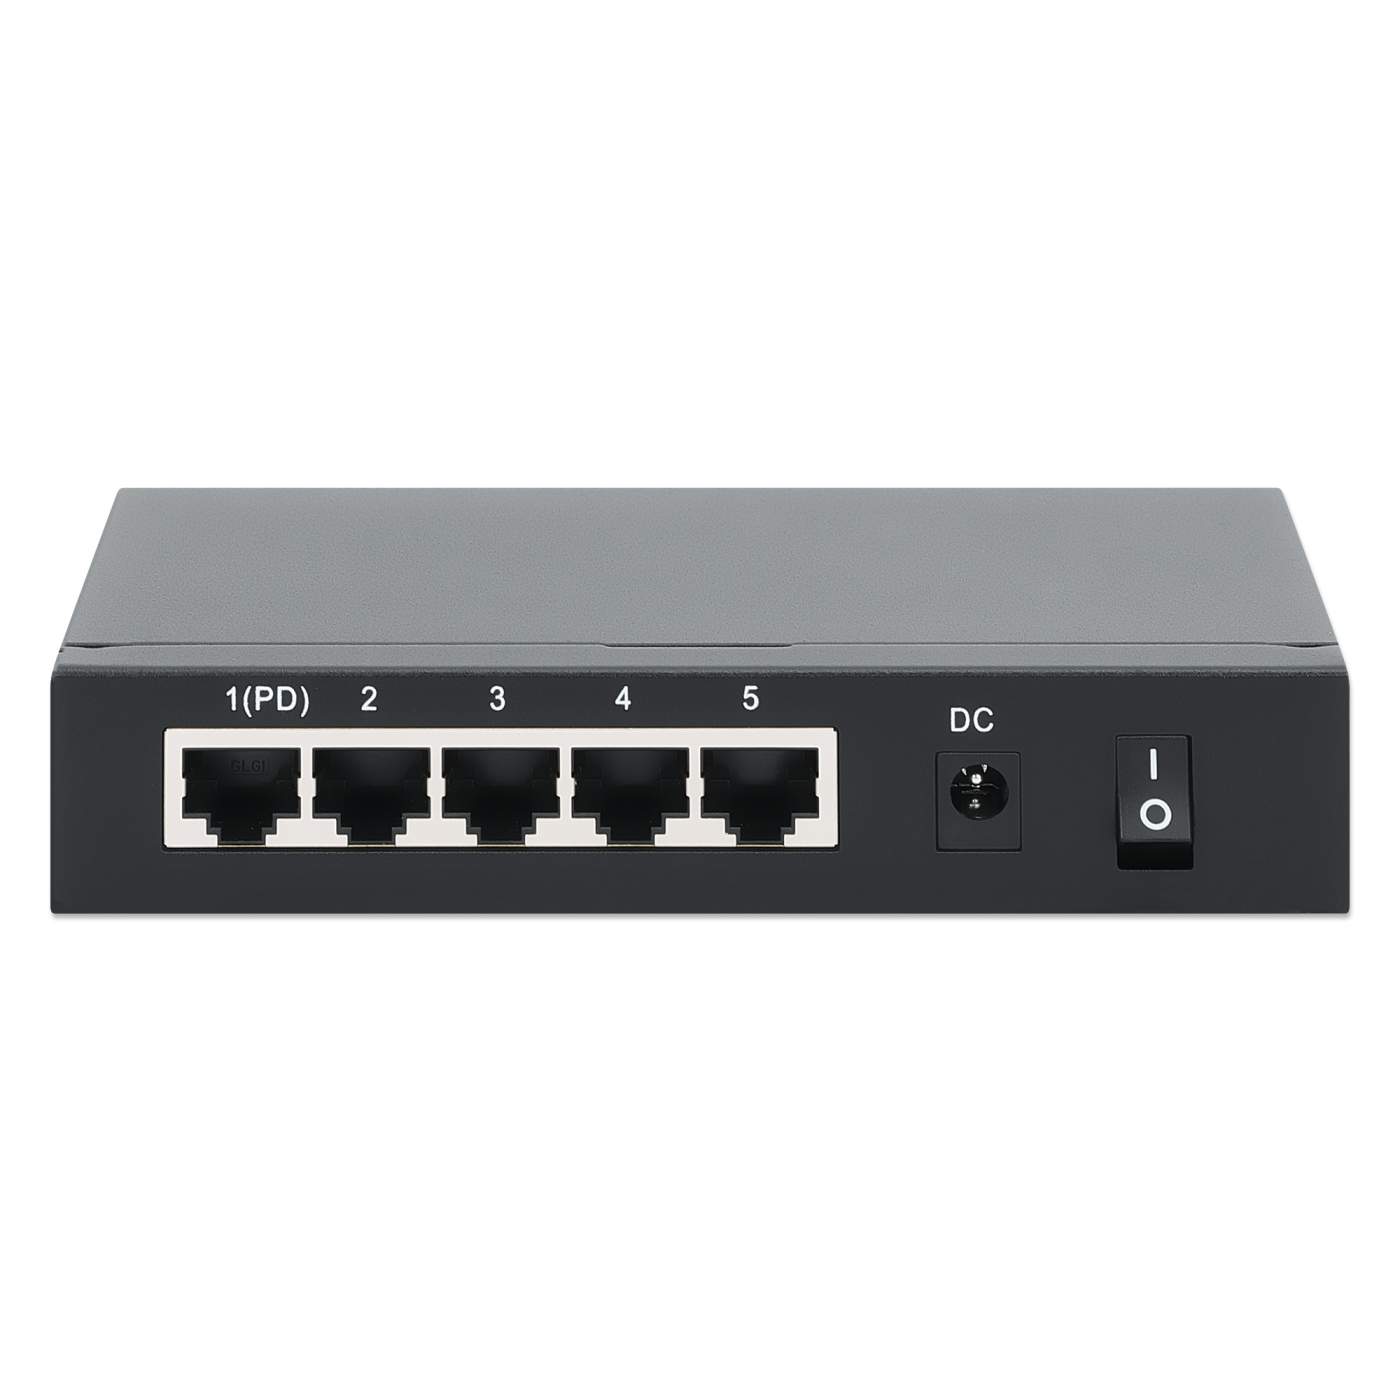 PoE-Powered 5-Port Gigabit Switch with PoE-Passthrough Image 7